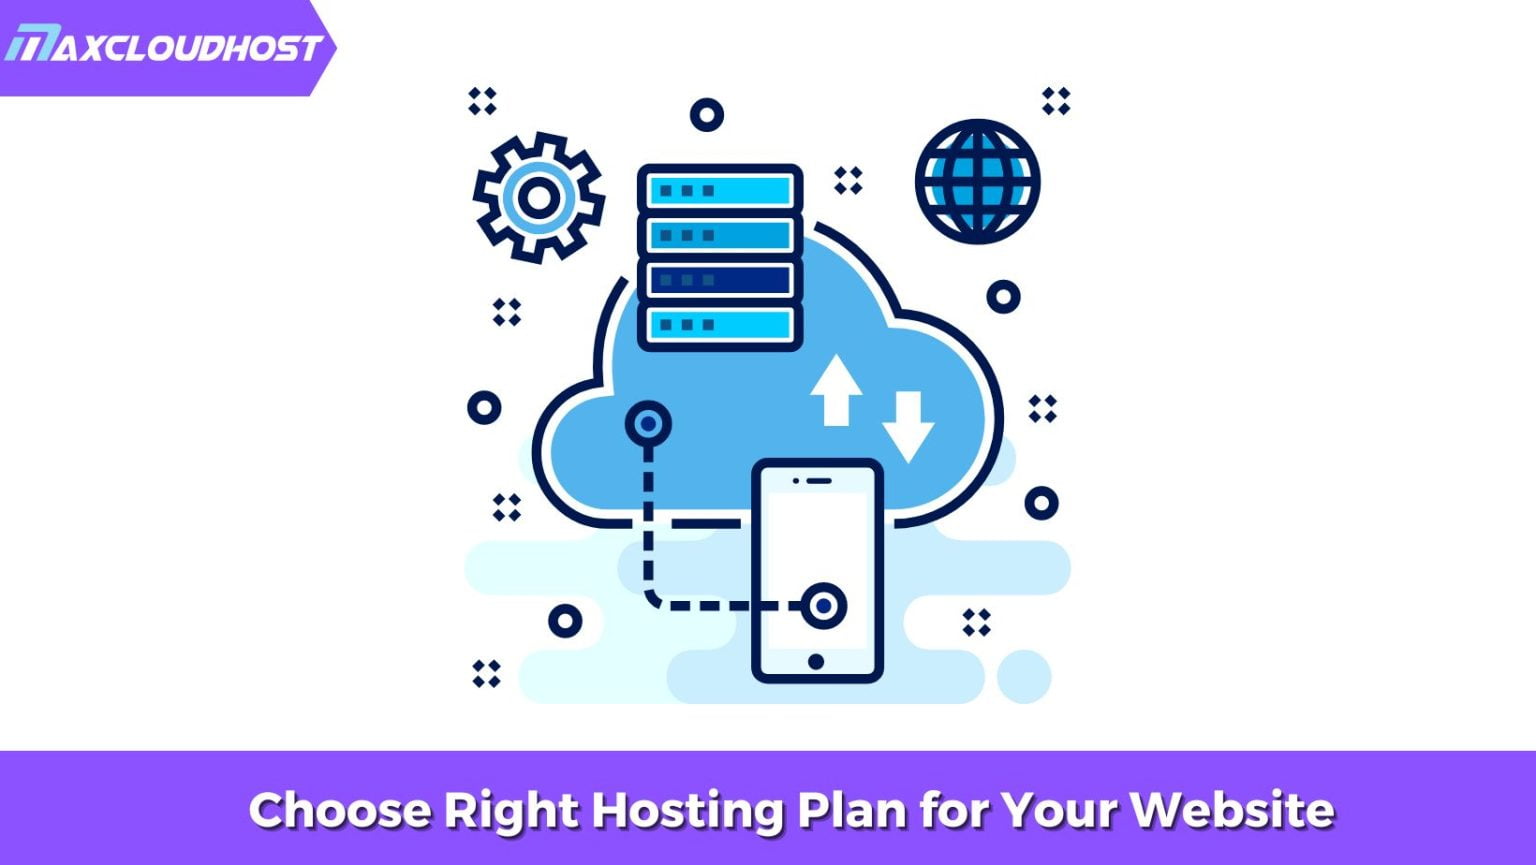 How to Choose the Right Hosting Plan for Your Website?